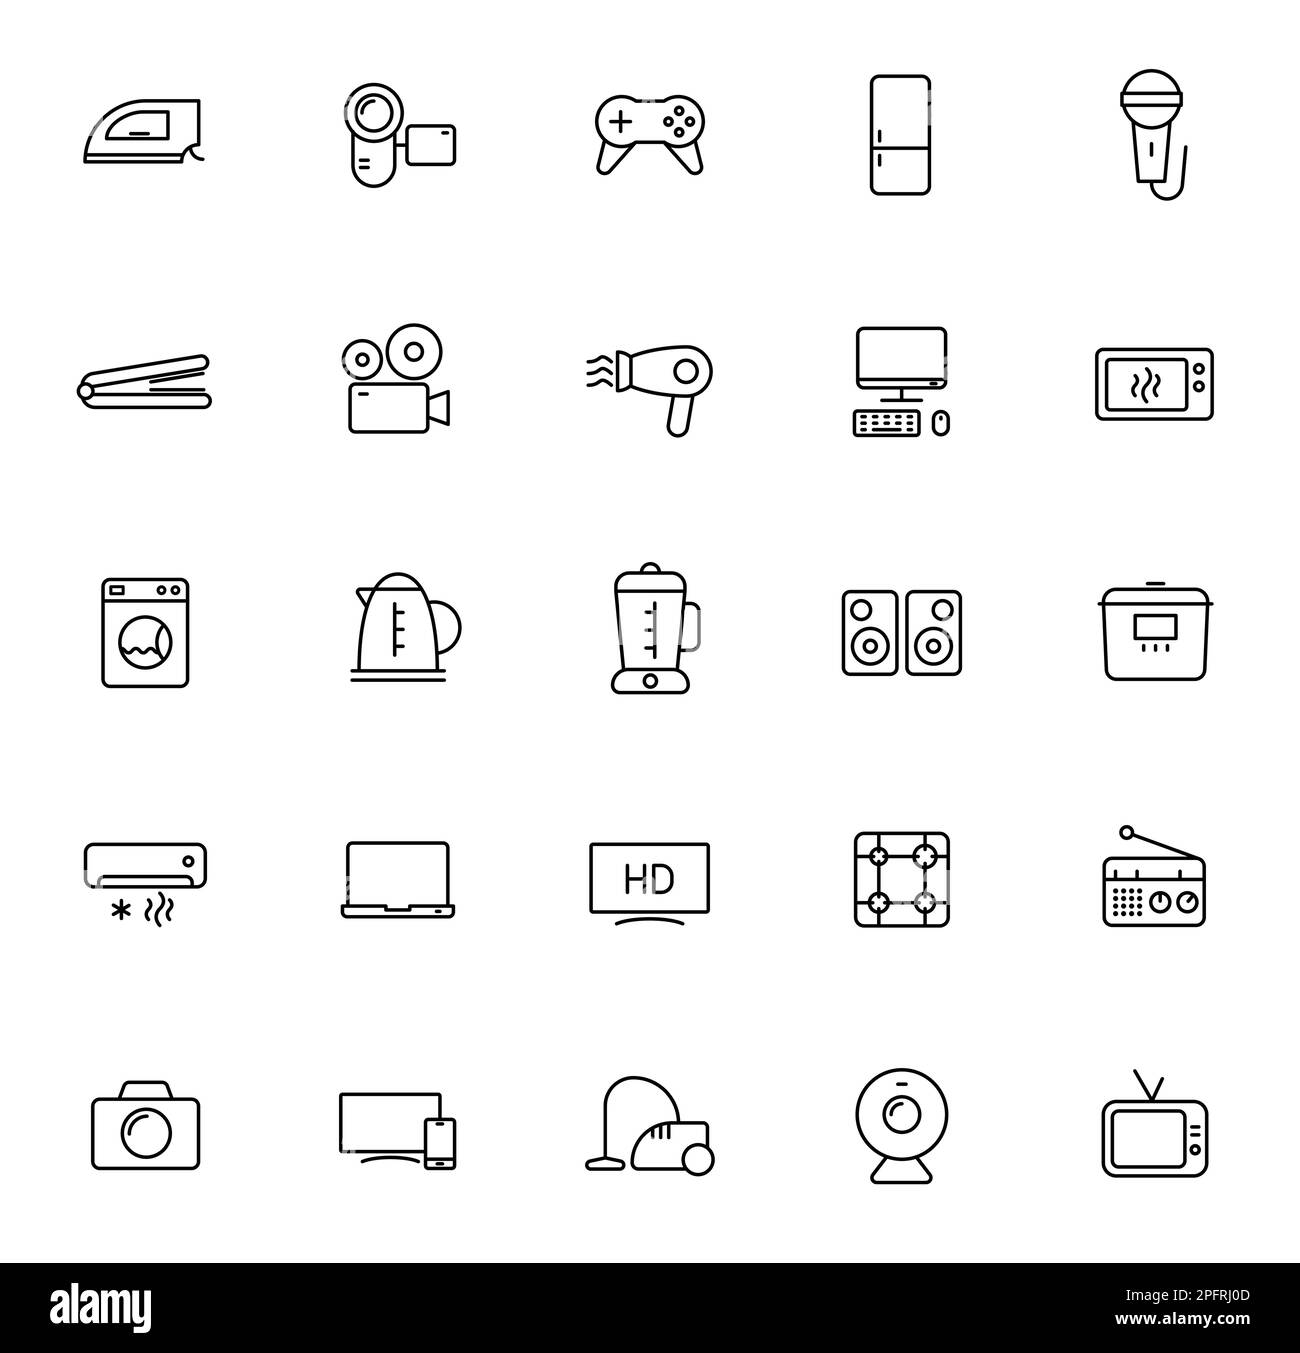 home appliances outline vector icons Stock Vector